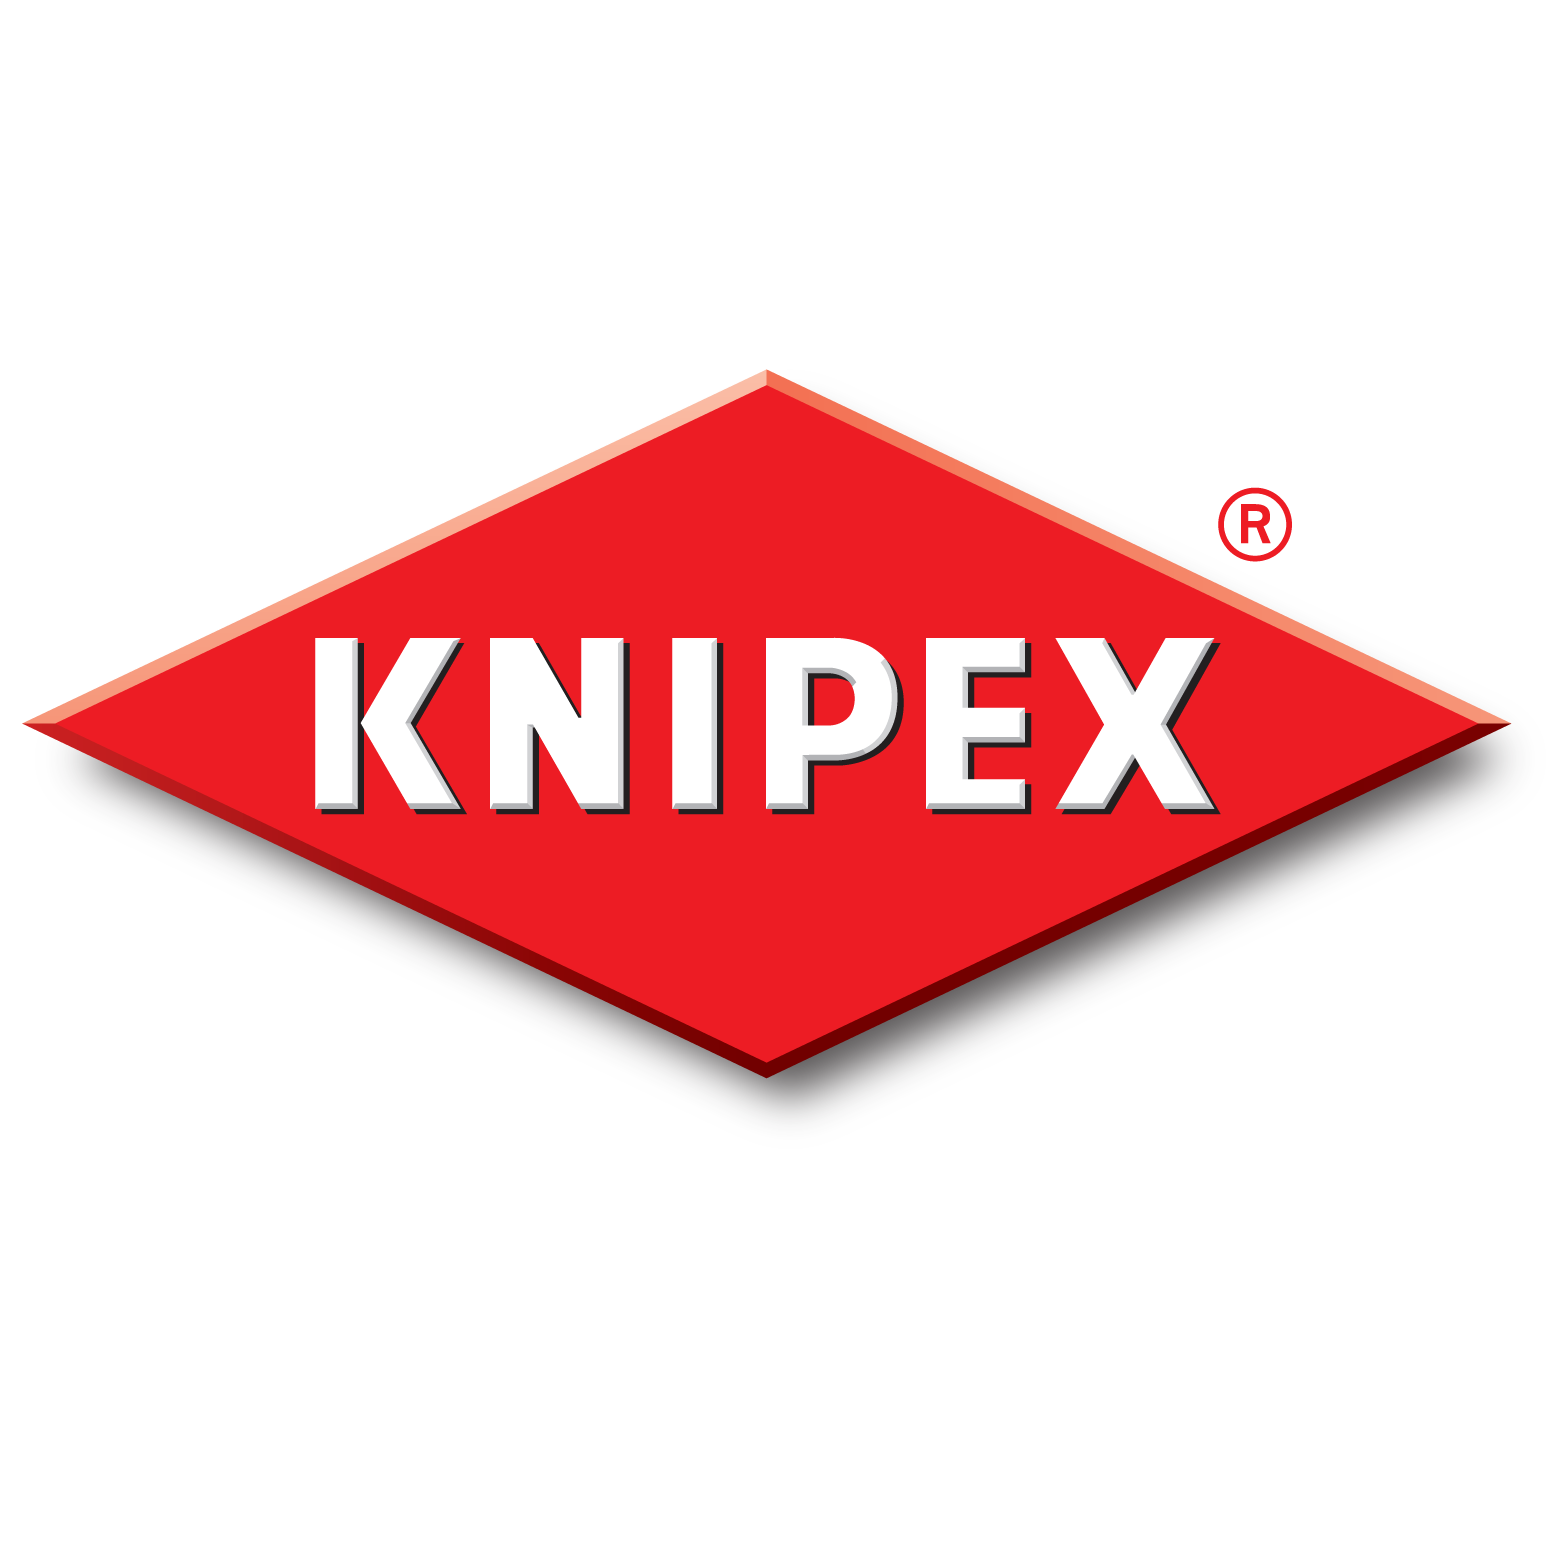 Knipex Safety tools utilities supply high voltage tooling cable intallation suppliers for lineman technicians installers toronto ontario